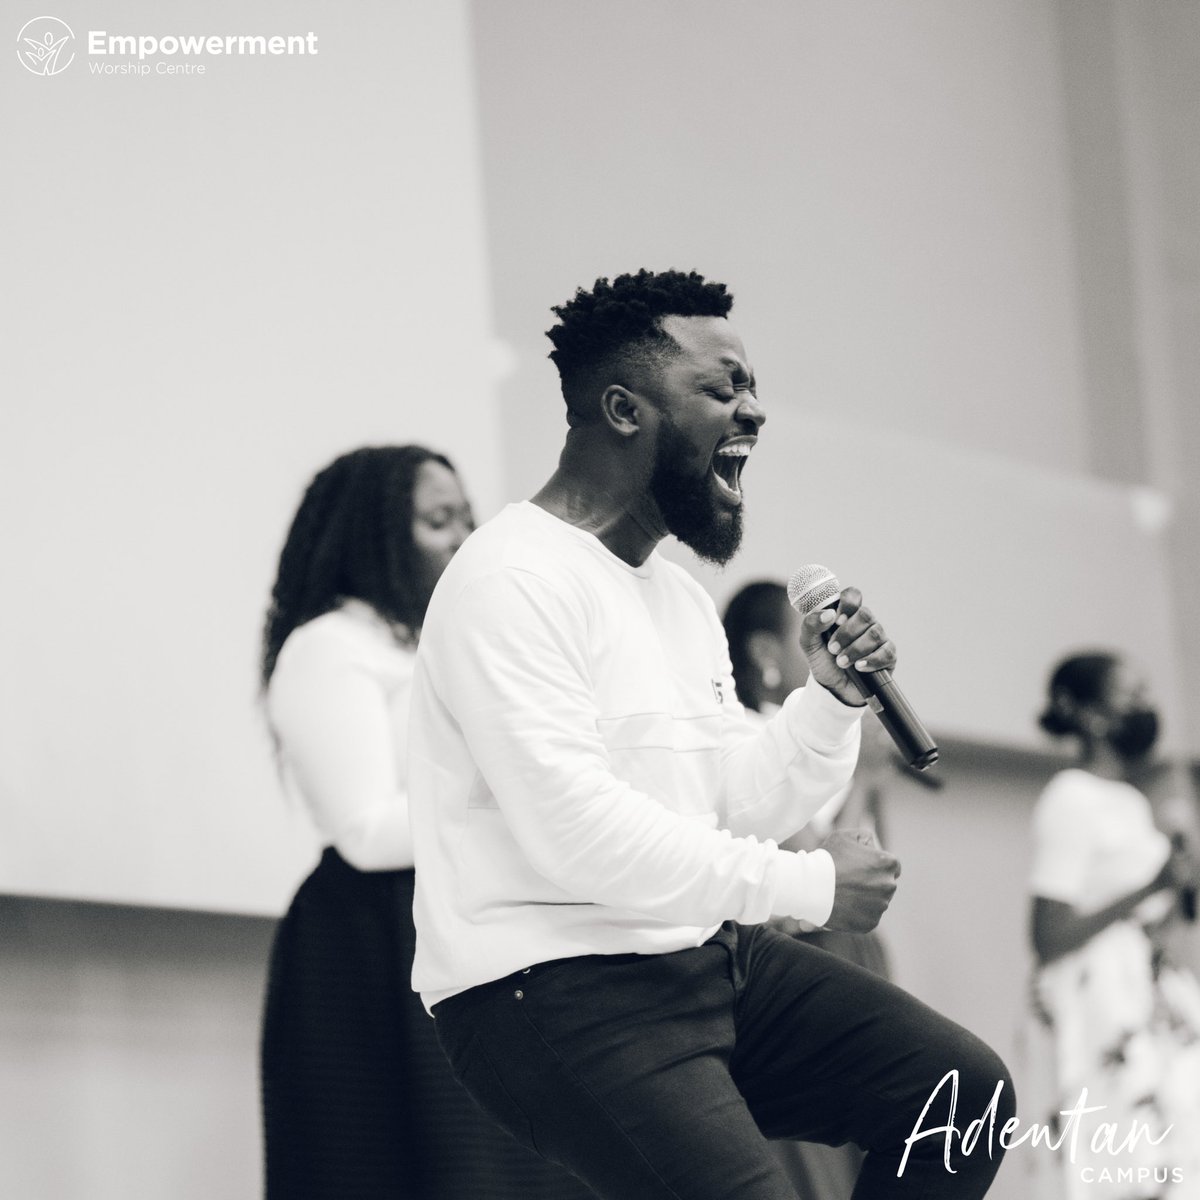 “Let everything that breathes sing praises to the Lord! Praise the Lord!” 
[Psalm 150:6]
#ewcadentancampus #ewclive #worshipwednesdays #wednesday #worshipwednesday #worship #praise